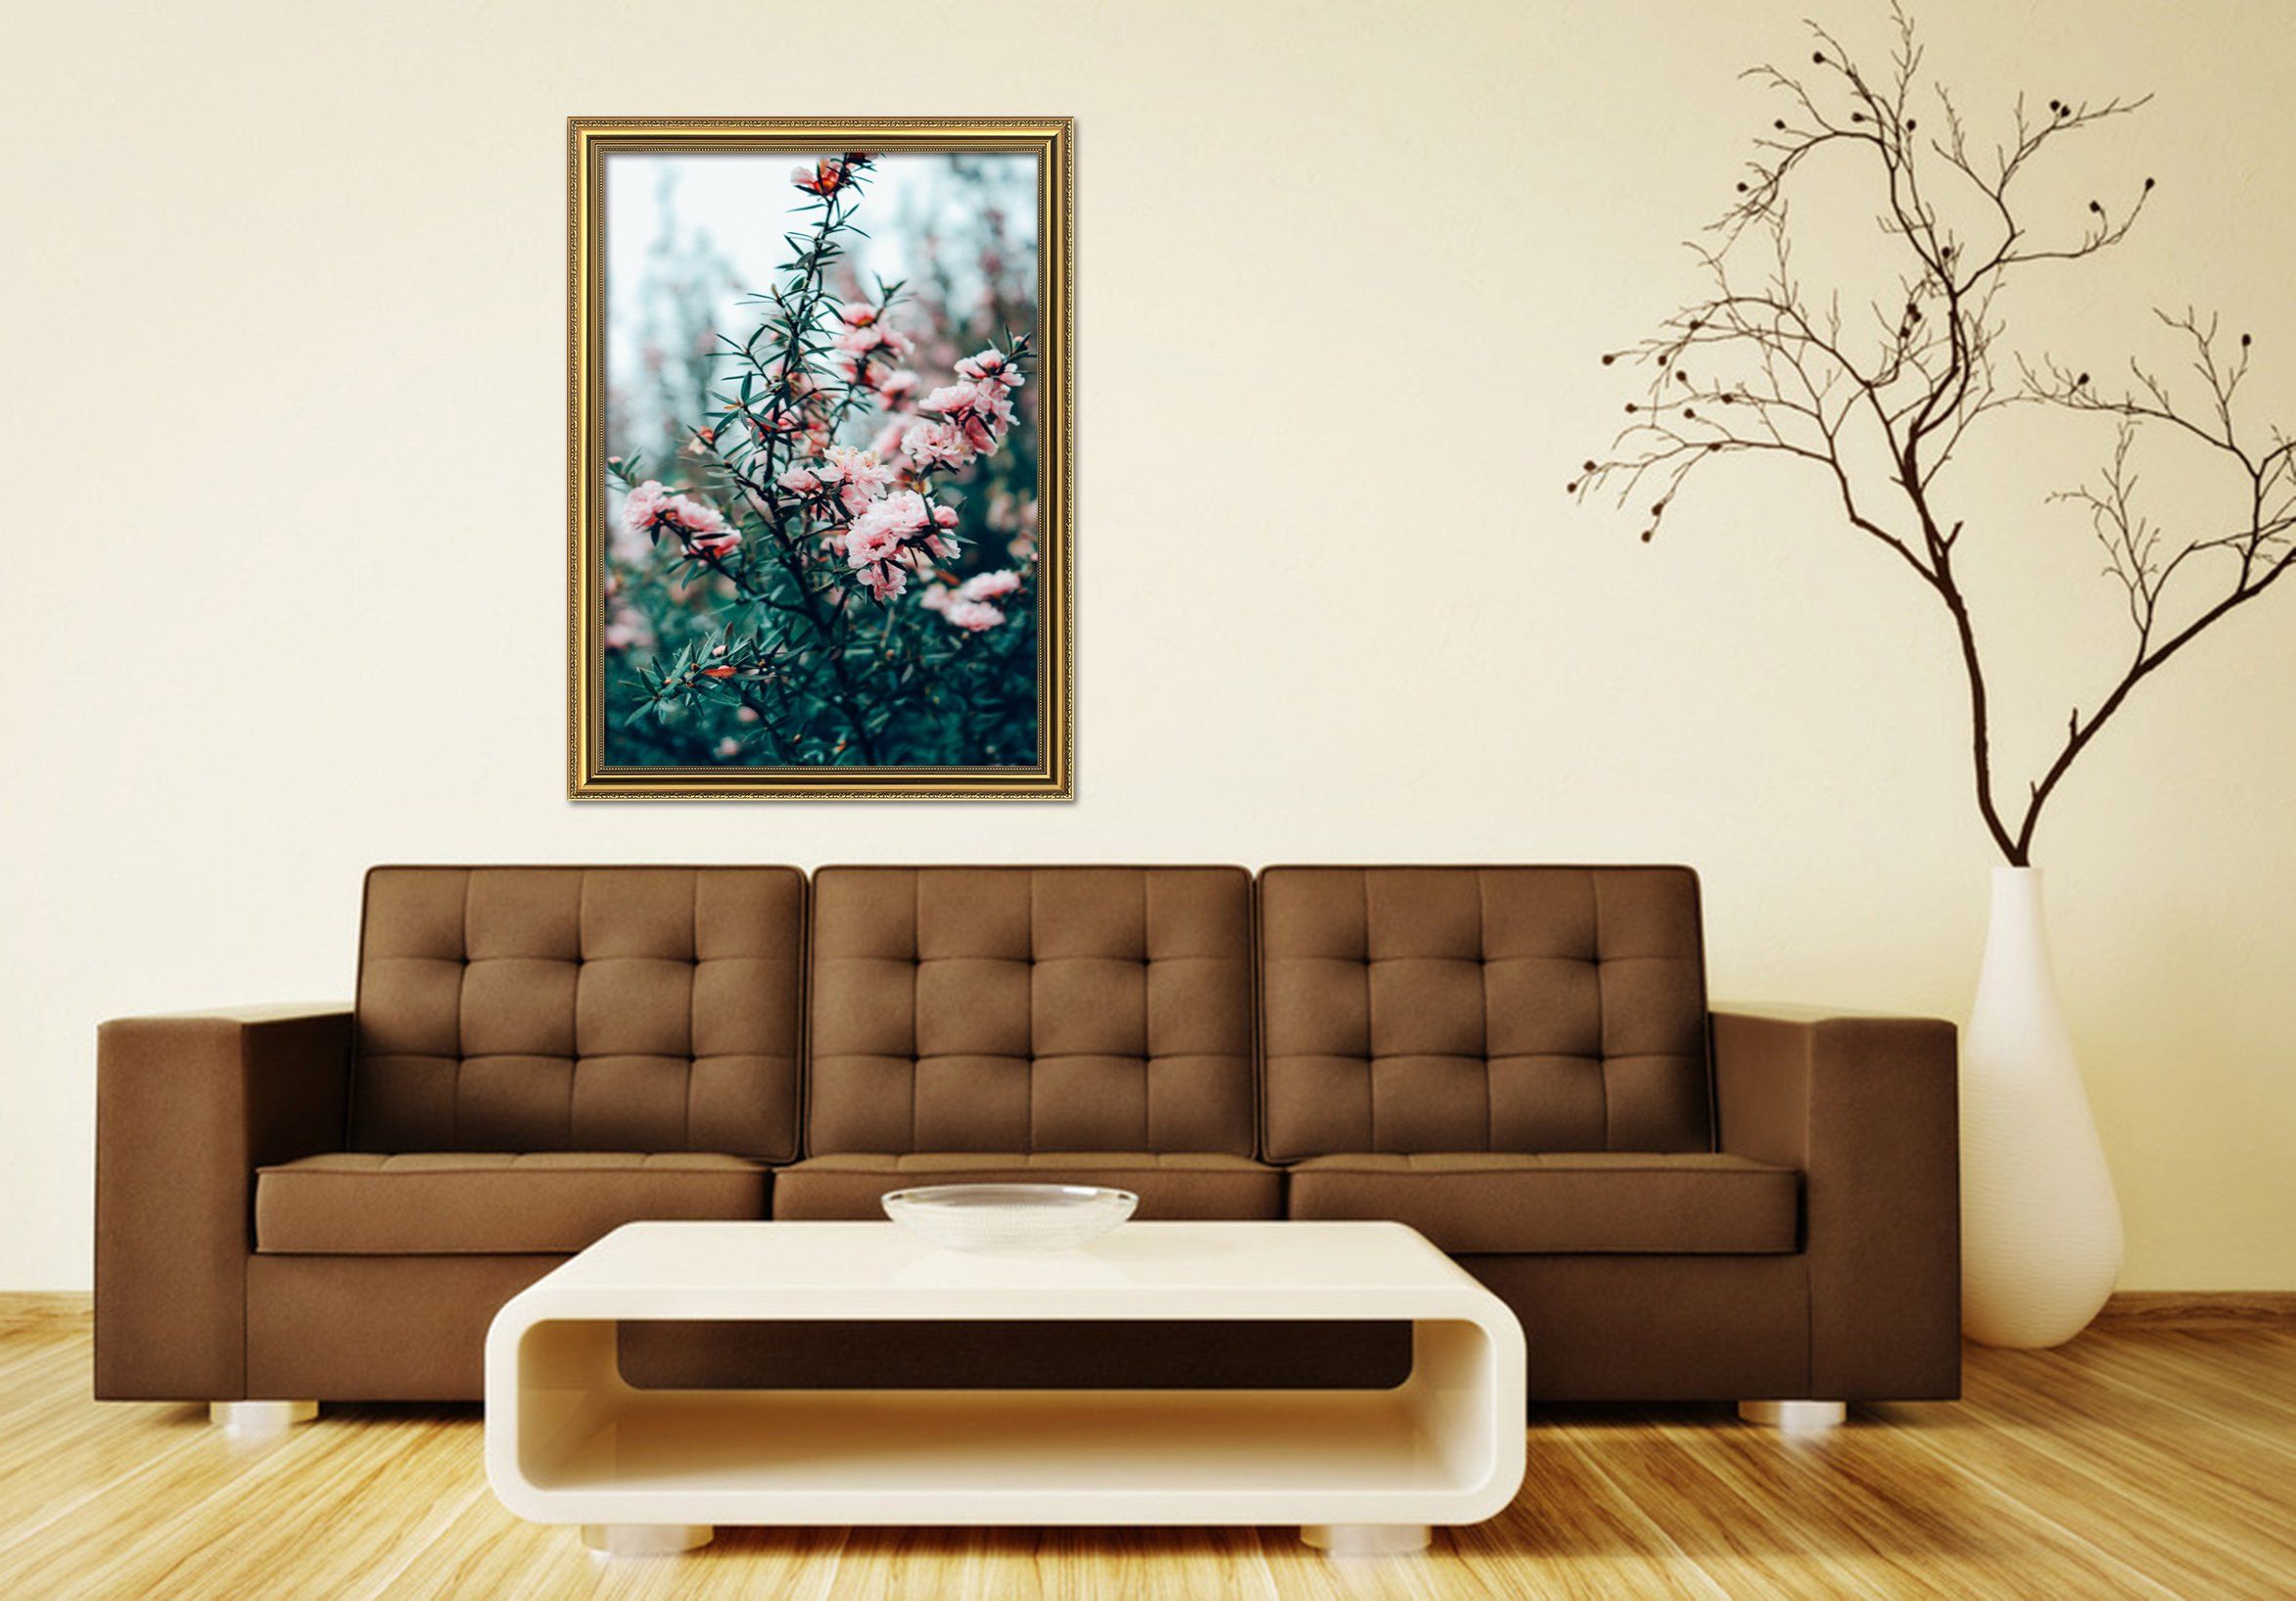 3D Among The Flowers 018 Fake Framed Print Painting Wallpaper AJ Creativity Home 